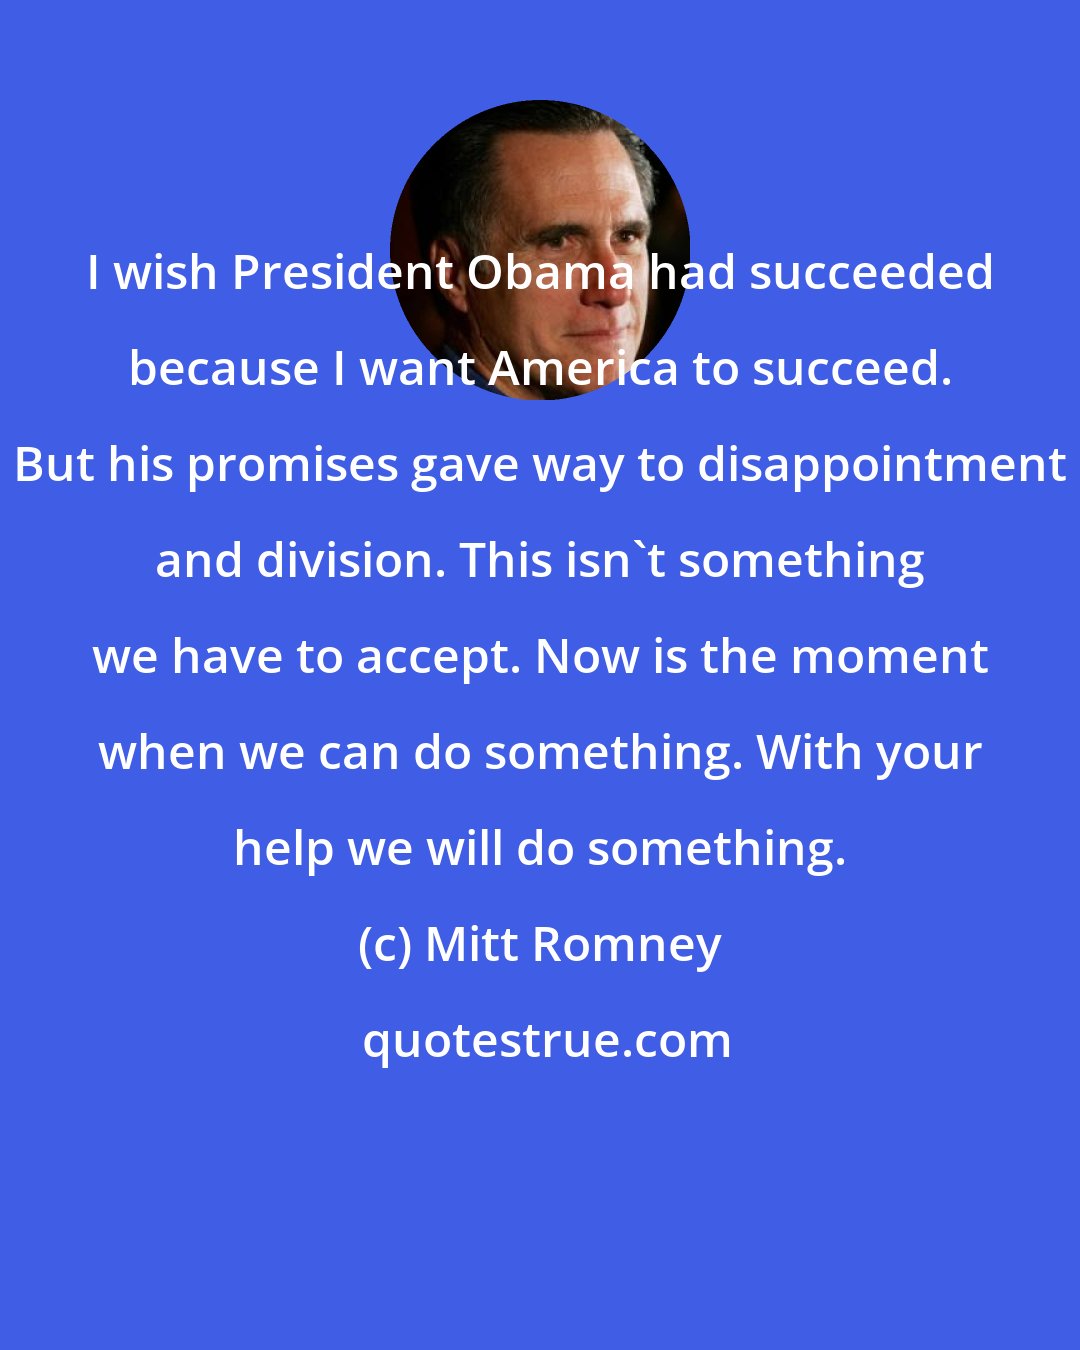 Mitt Romney: I wish President Obama had succeeded because I want America to succeed. But his promises gave way to disappointment and division. This isn't something we have to accept. Now is the moment when we can do something. With your help we will do something.